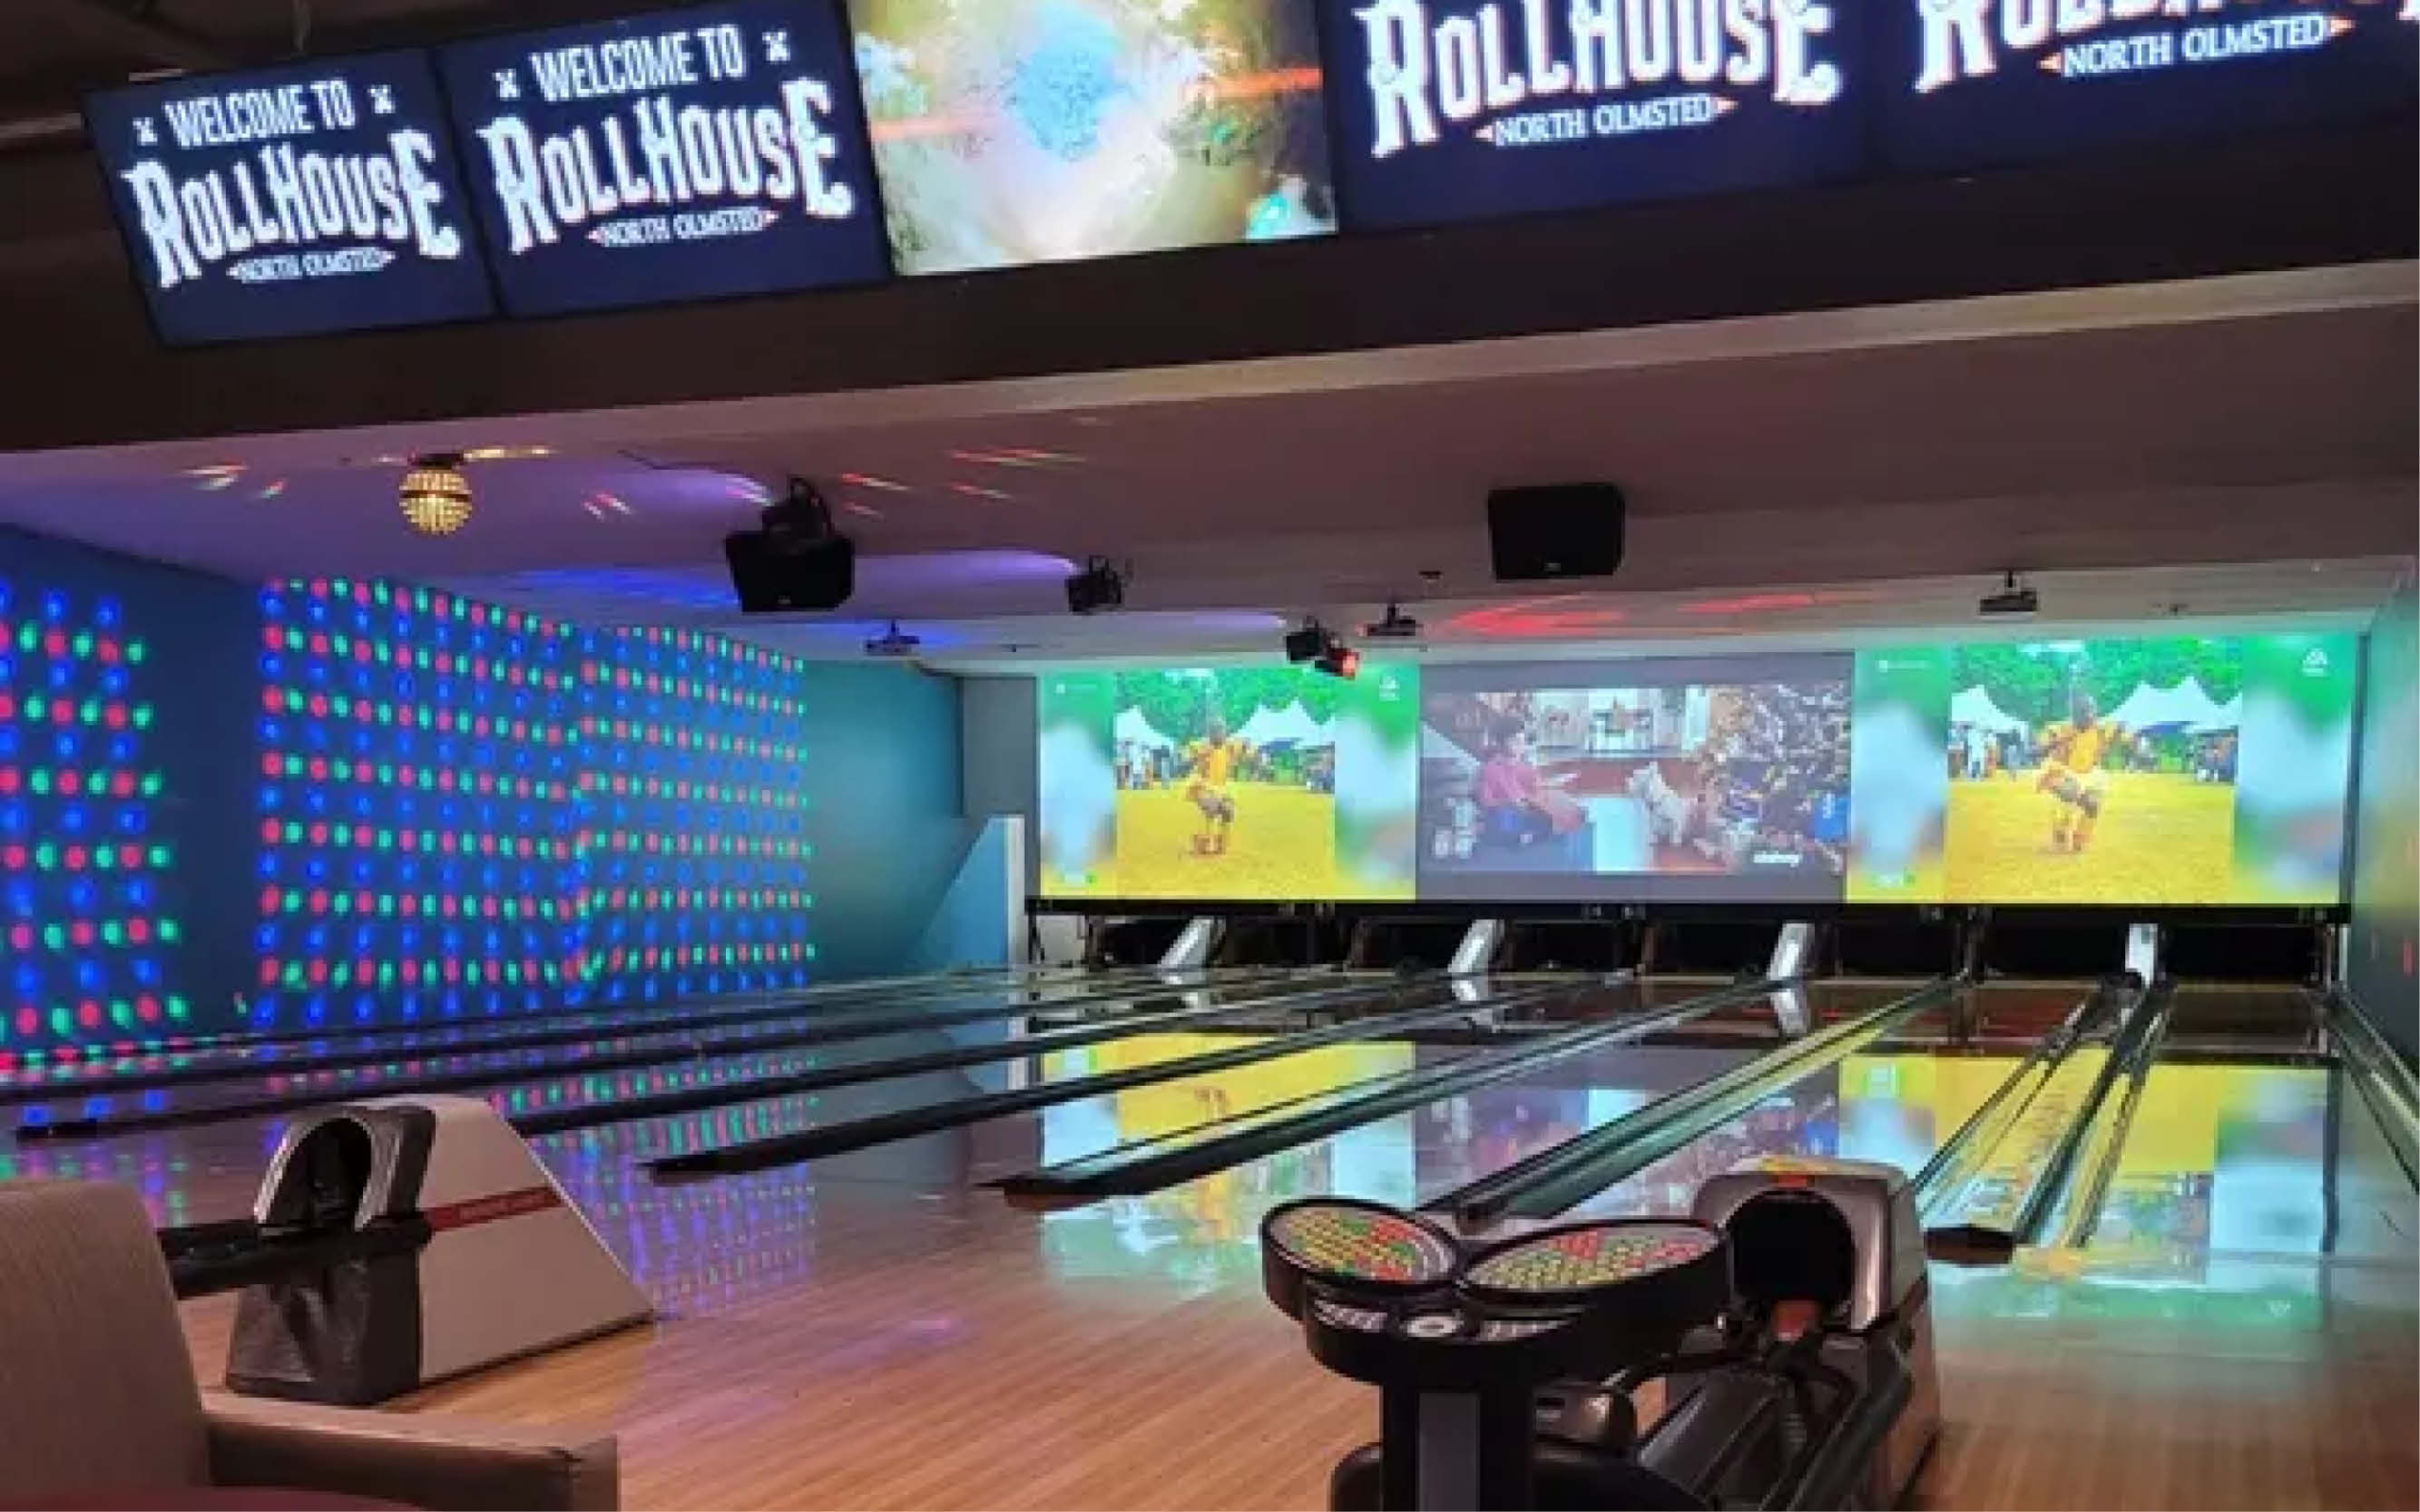 bowling lanes at the RollHouse